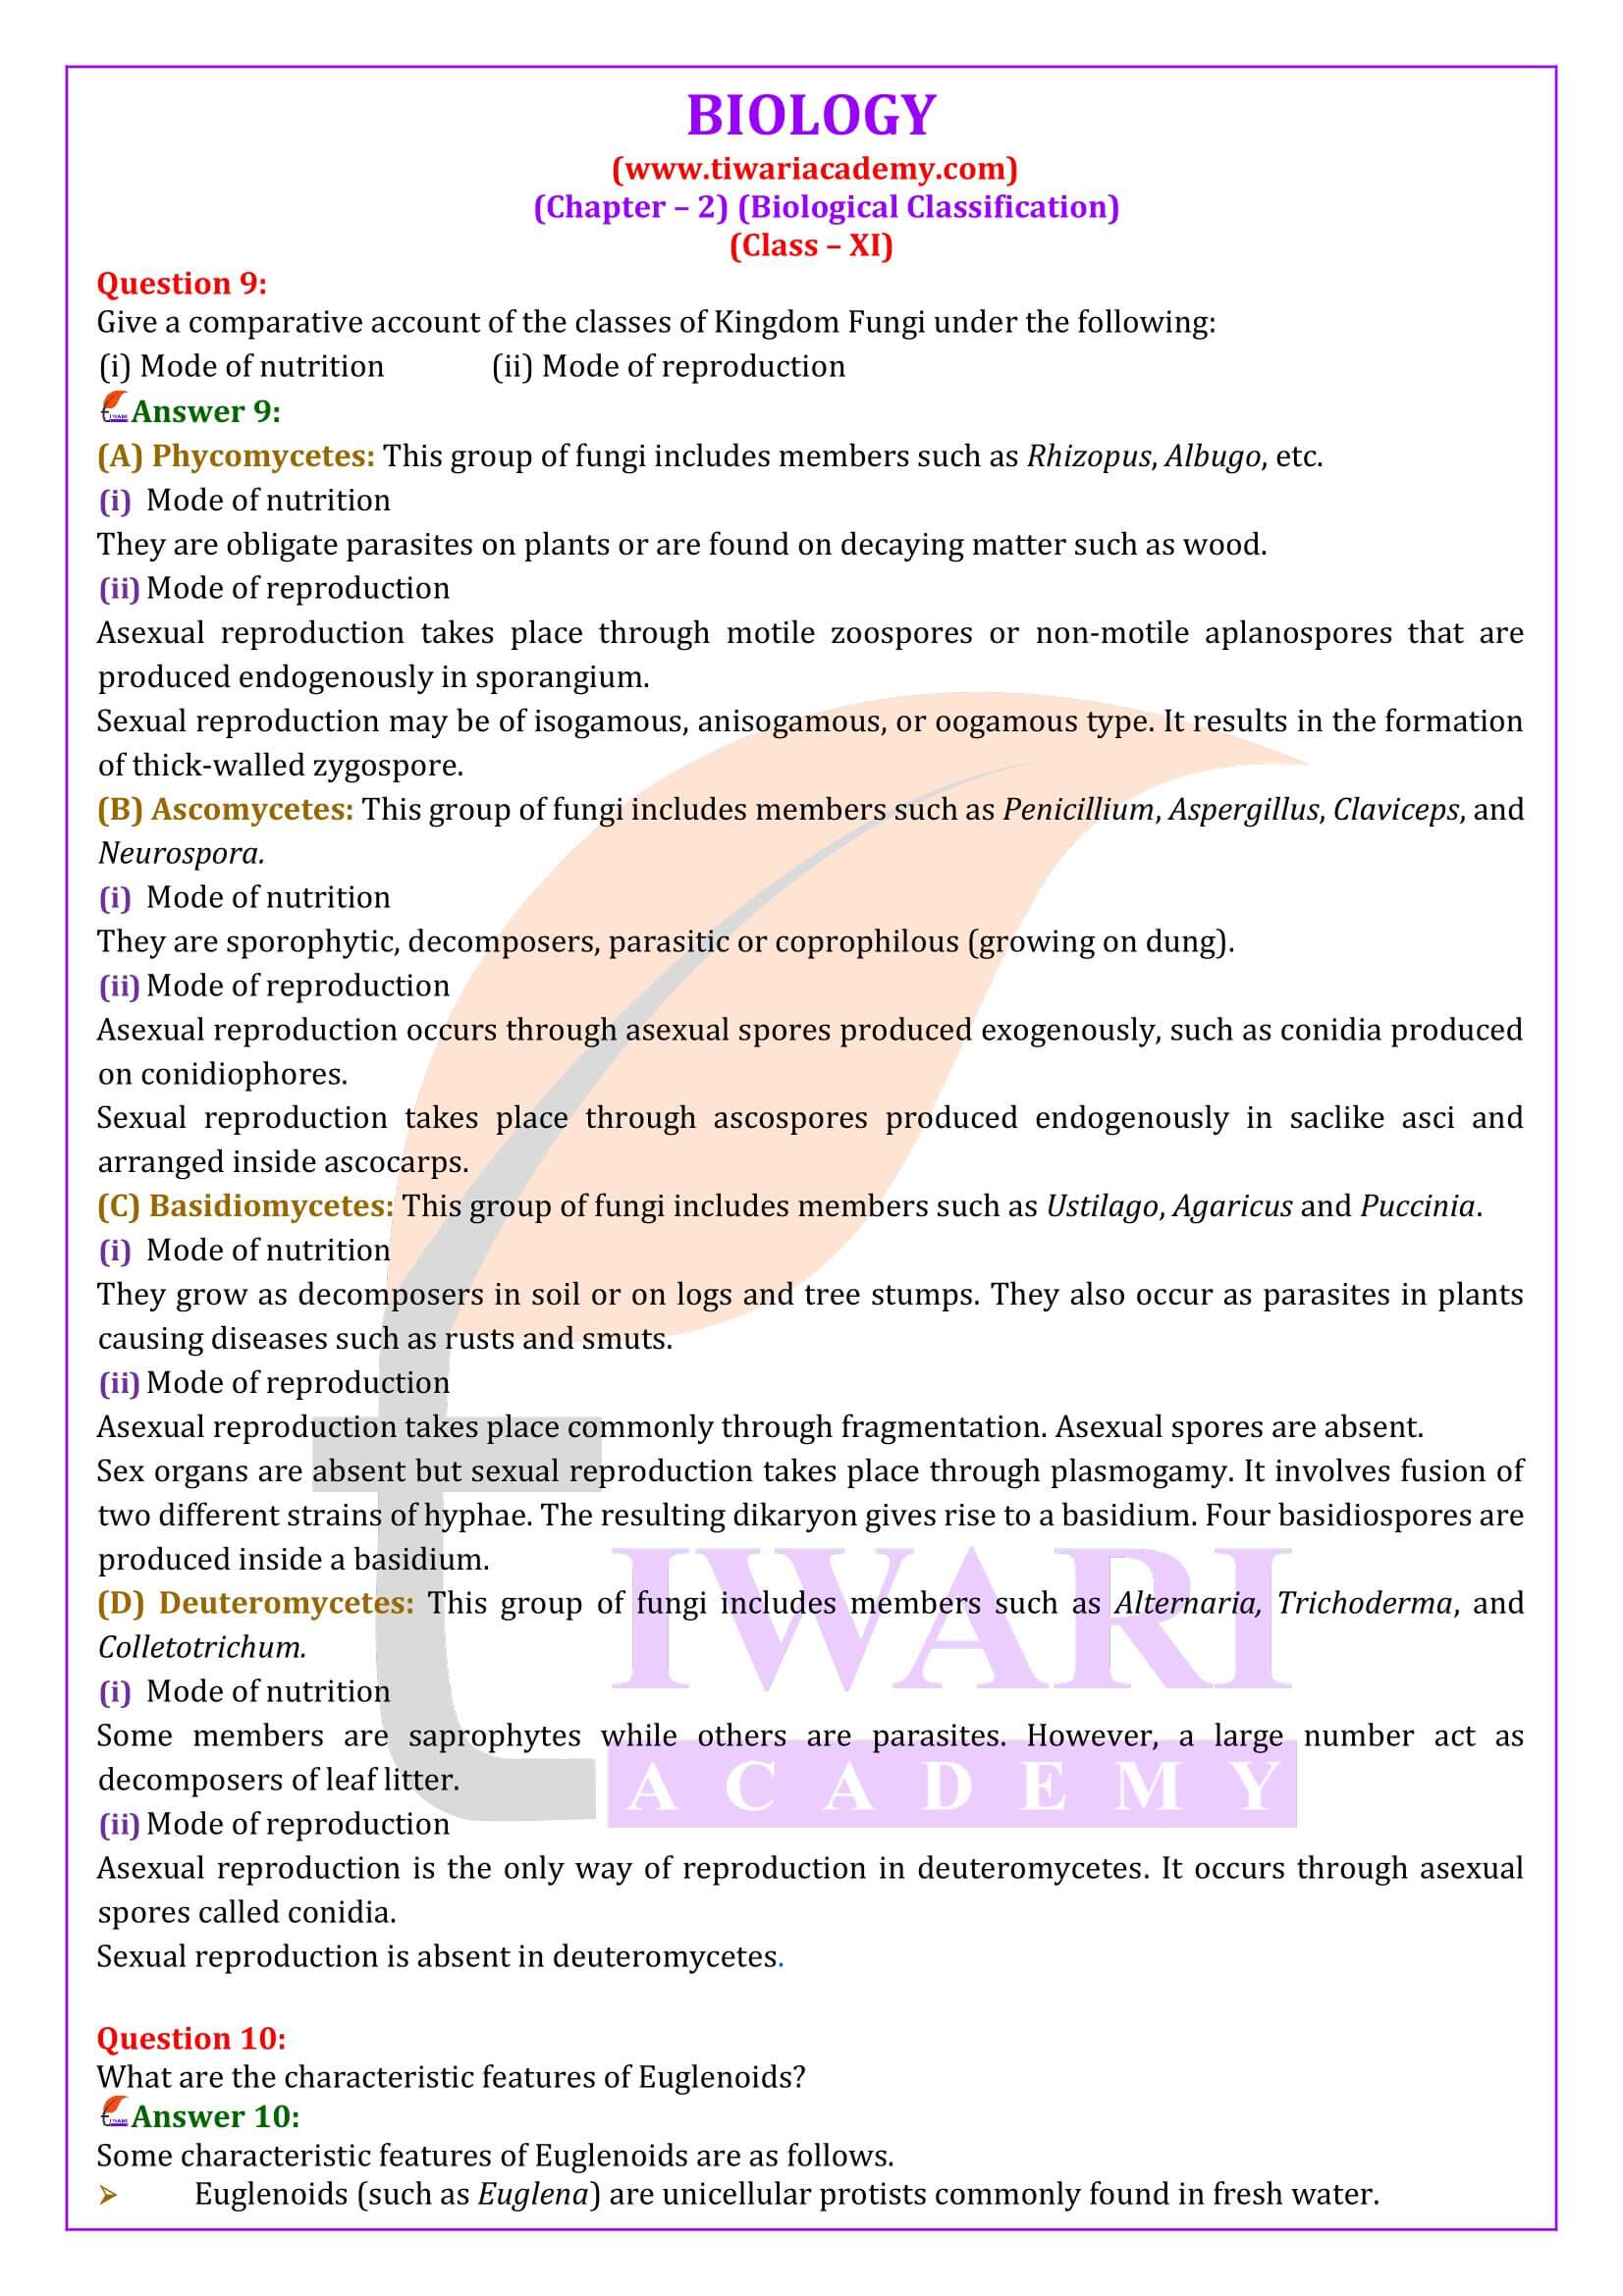 NCERT Solutions for Class 11 Biology Chapter 2 in English Medium